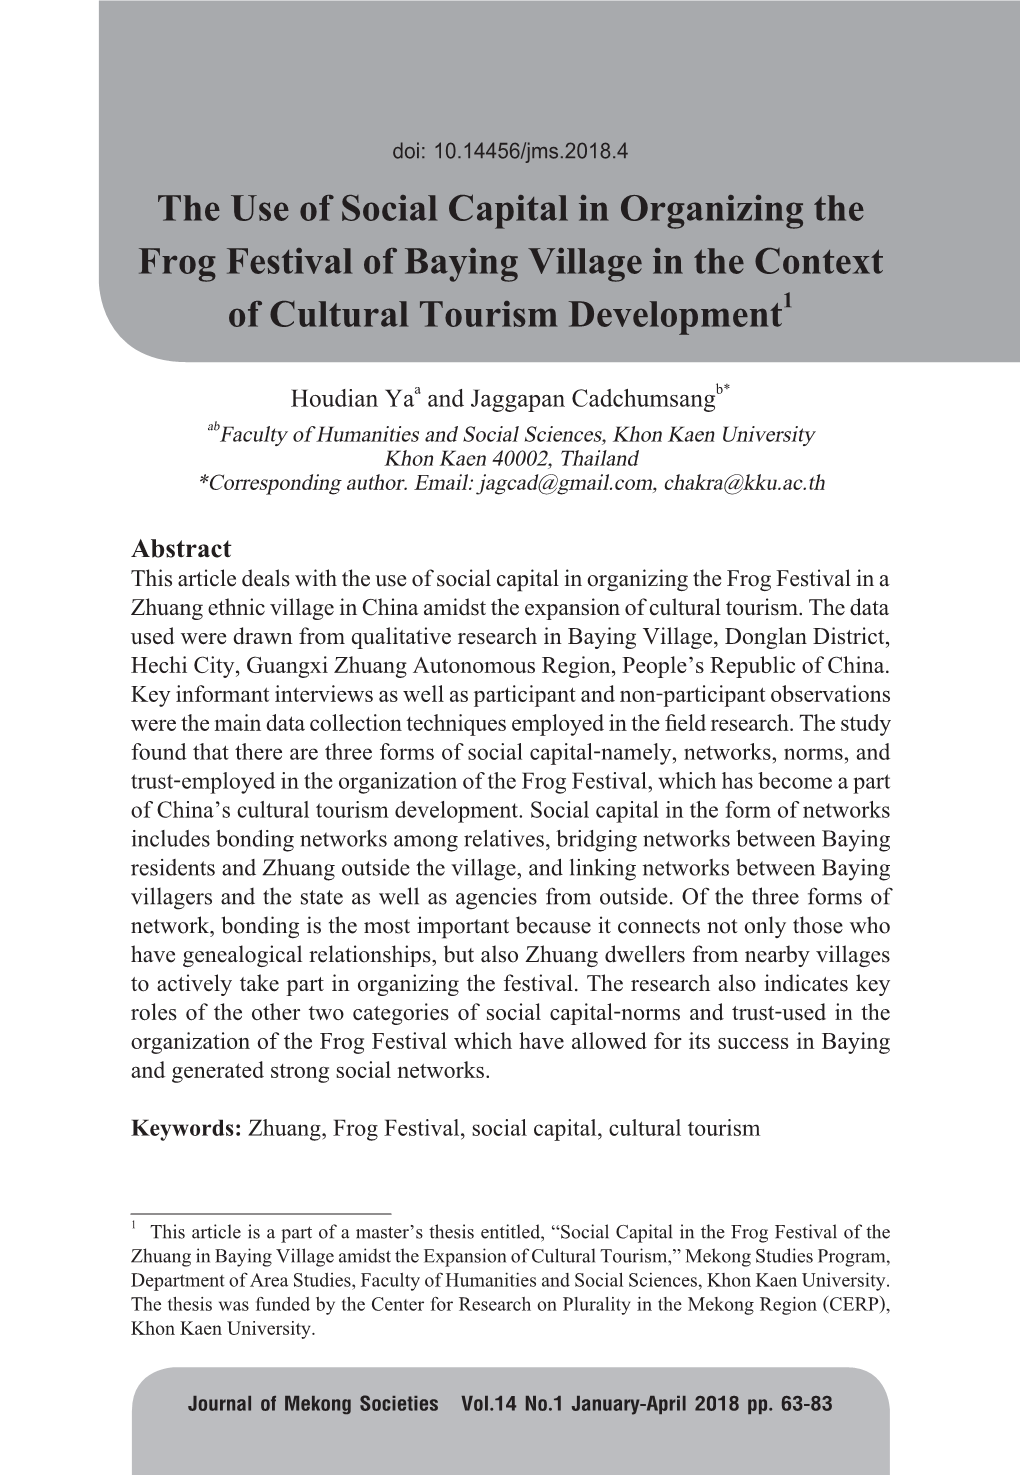 The Use of Social Capital in Organizing the Frog Festival Of